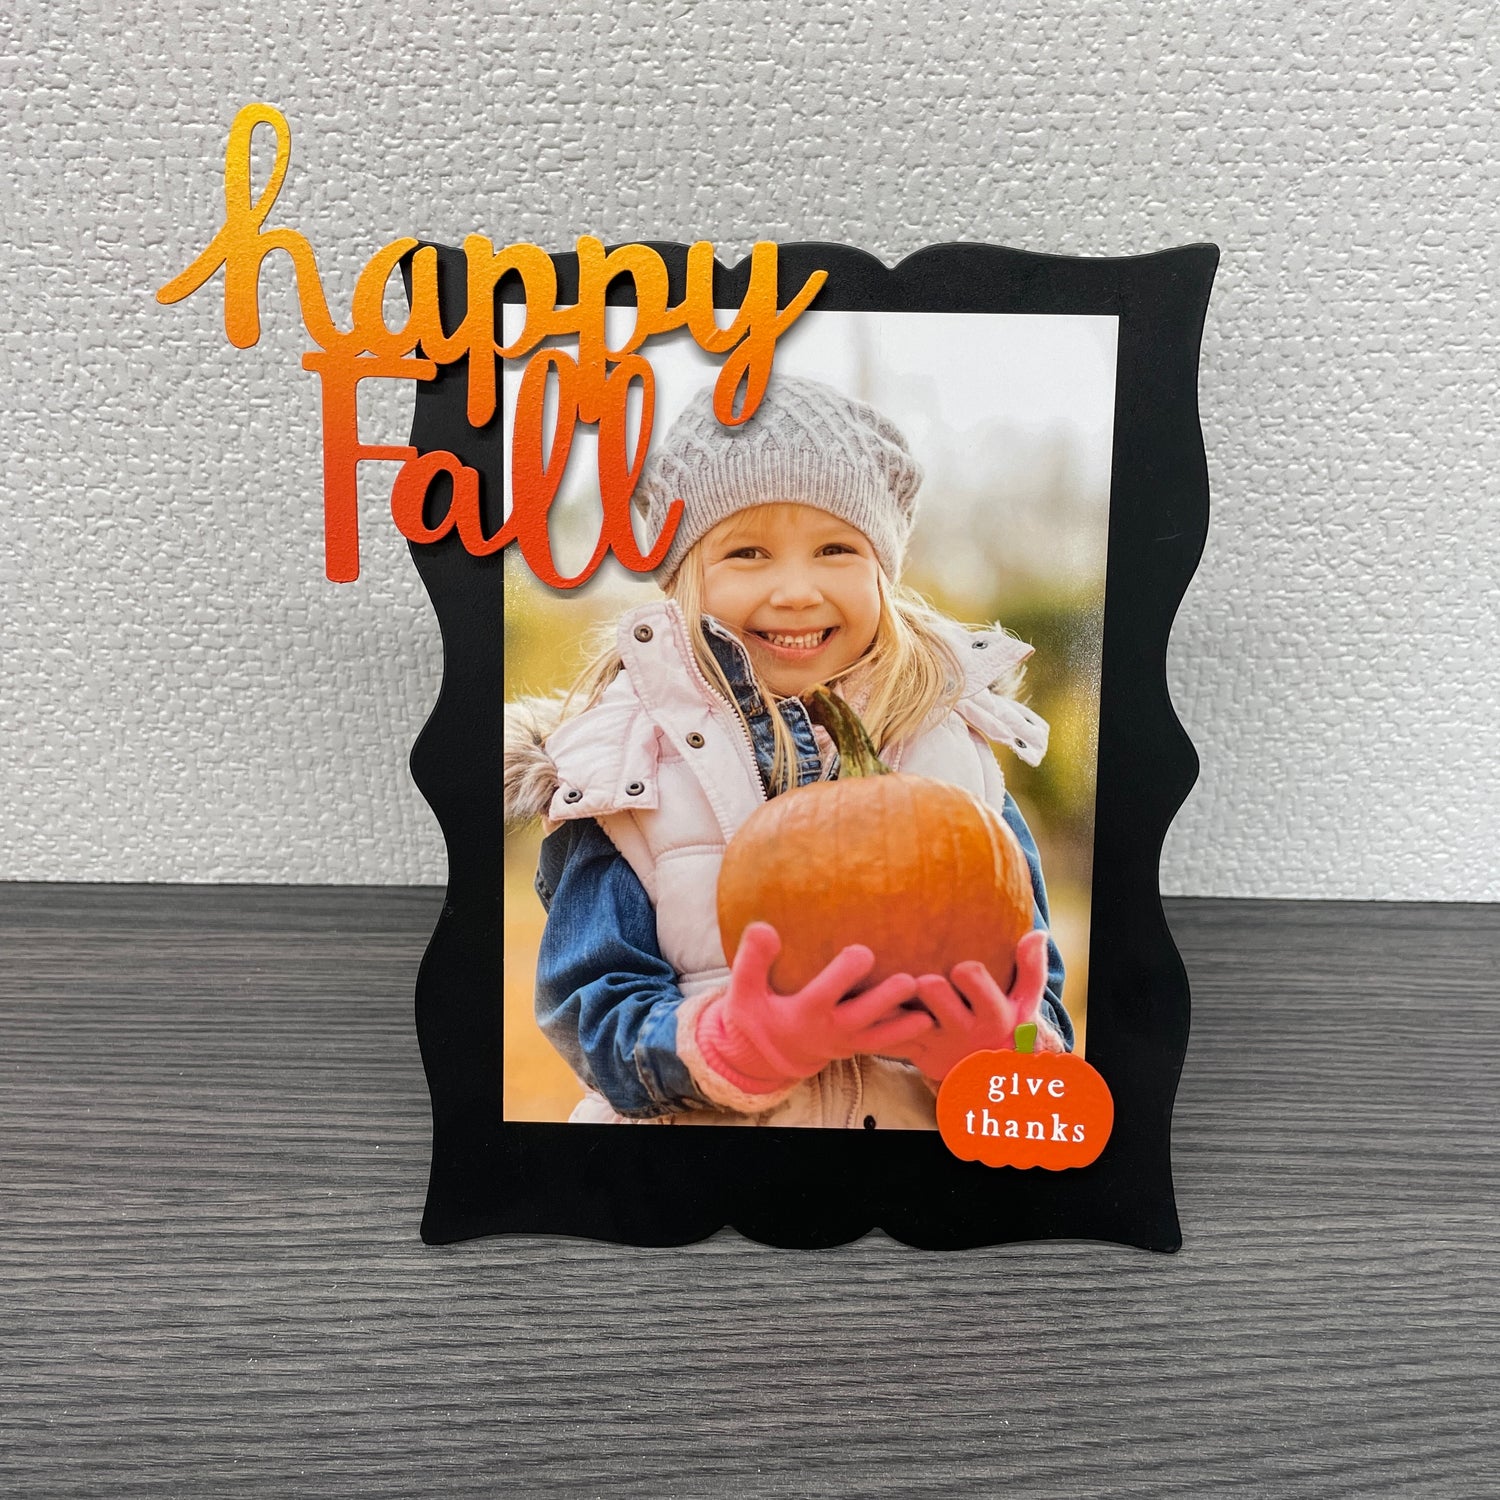 &quot;Happy Fall&quot; Magnet Yellow